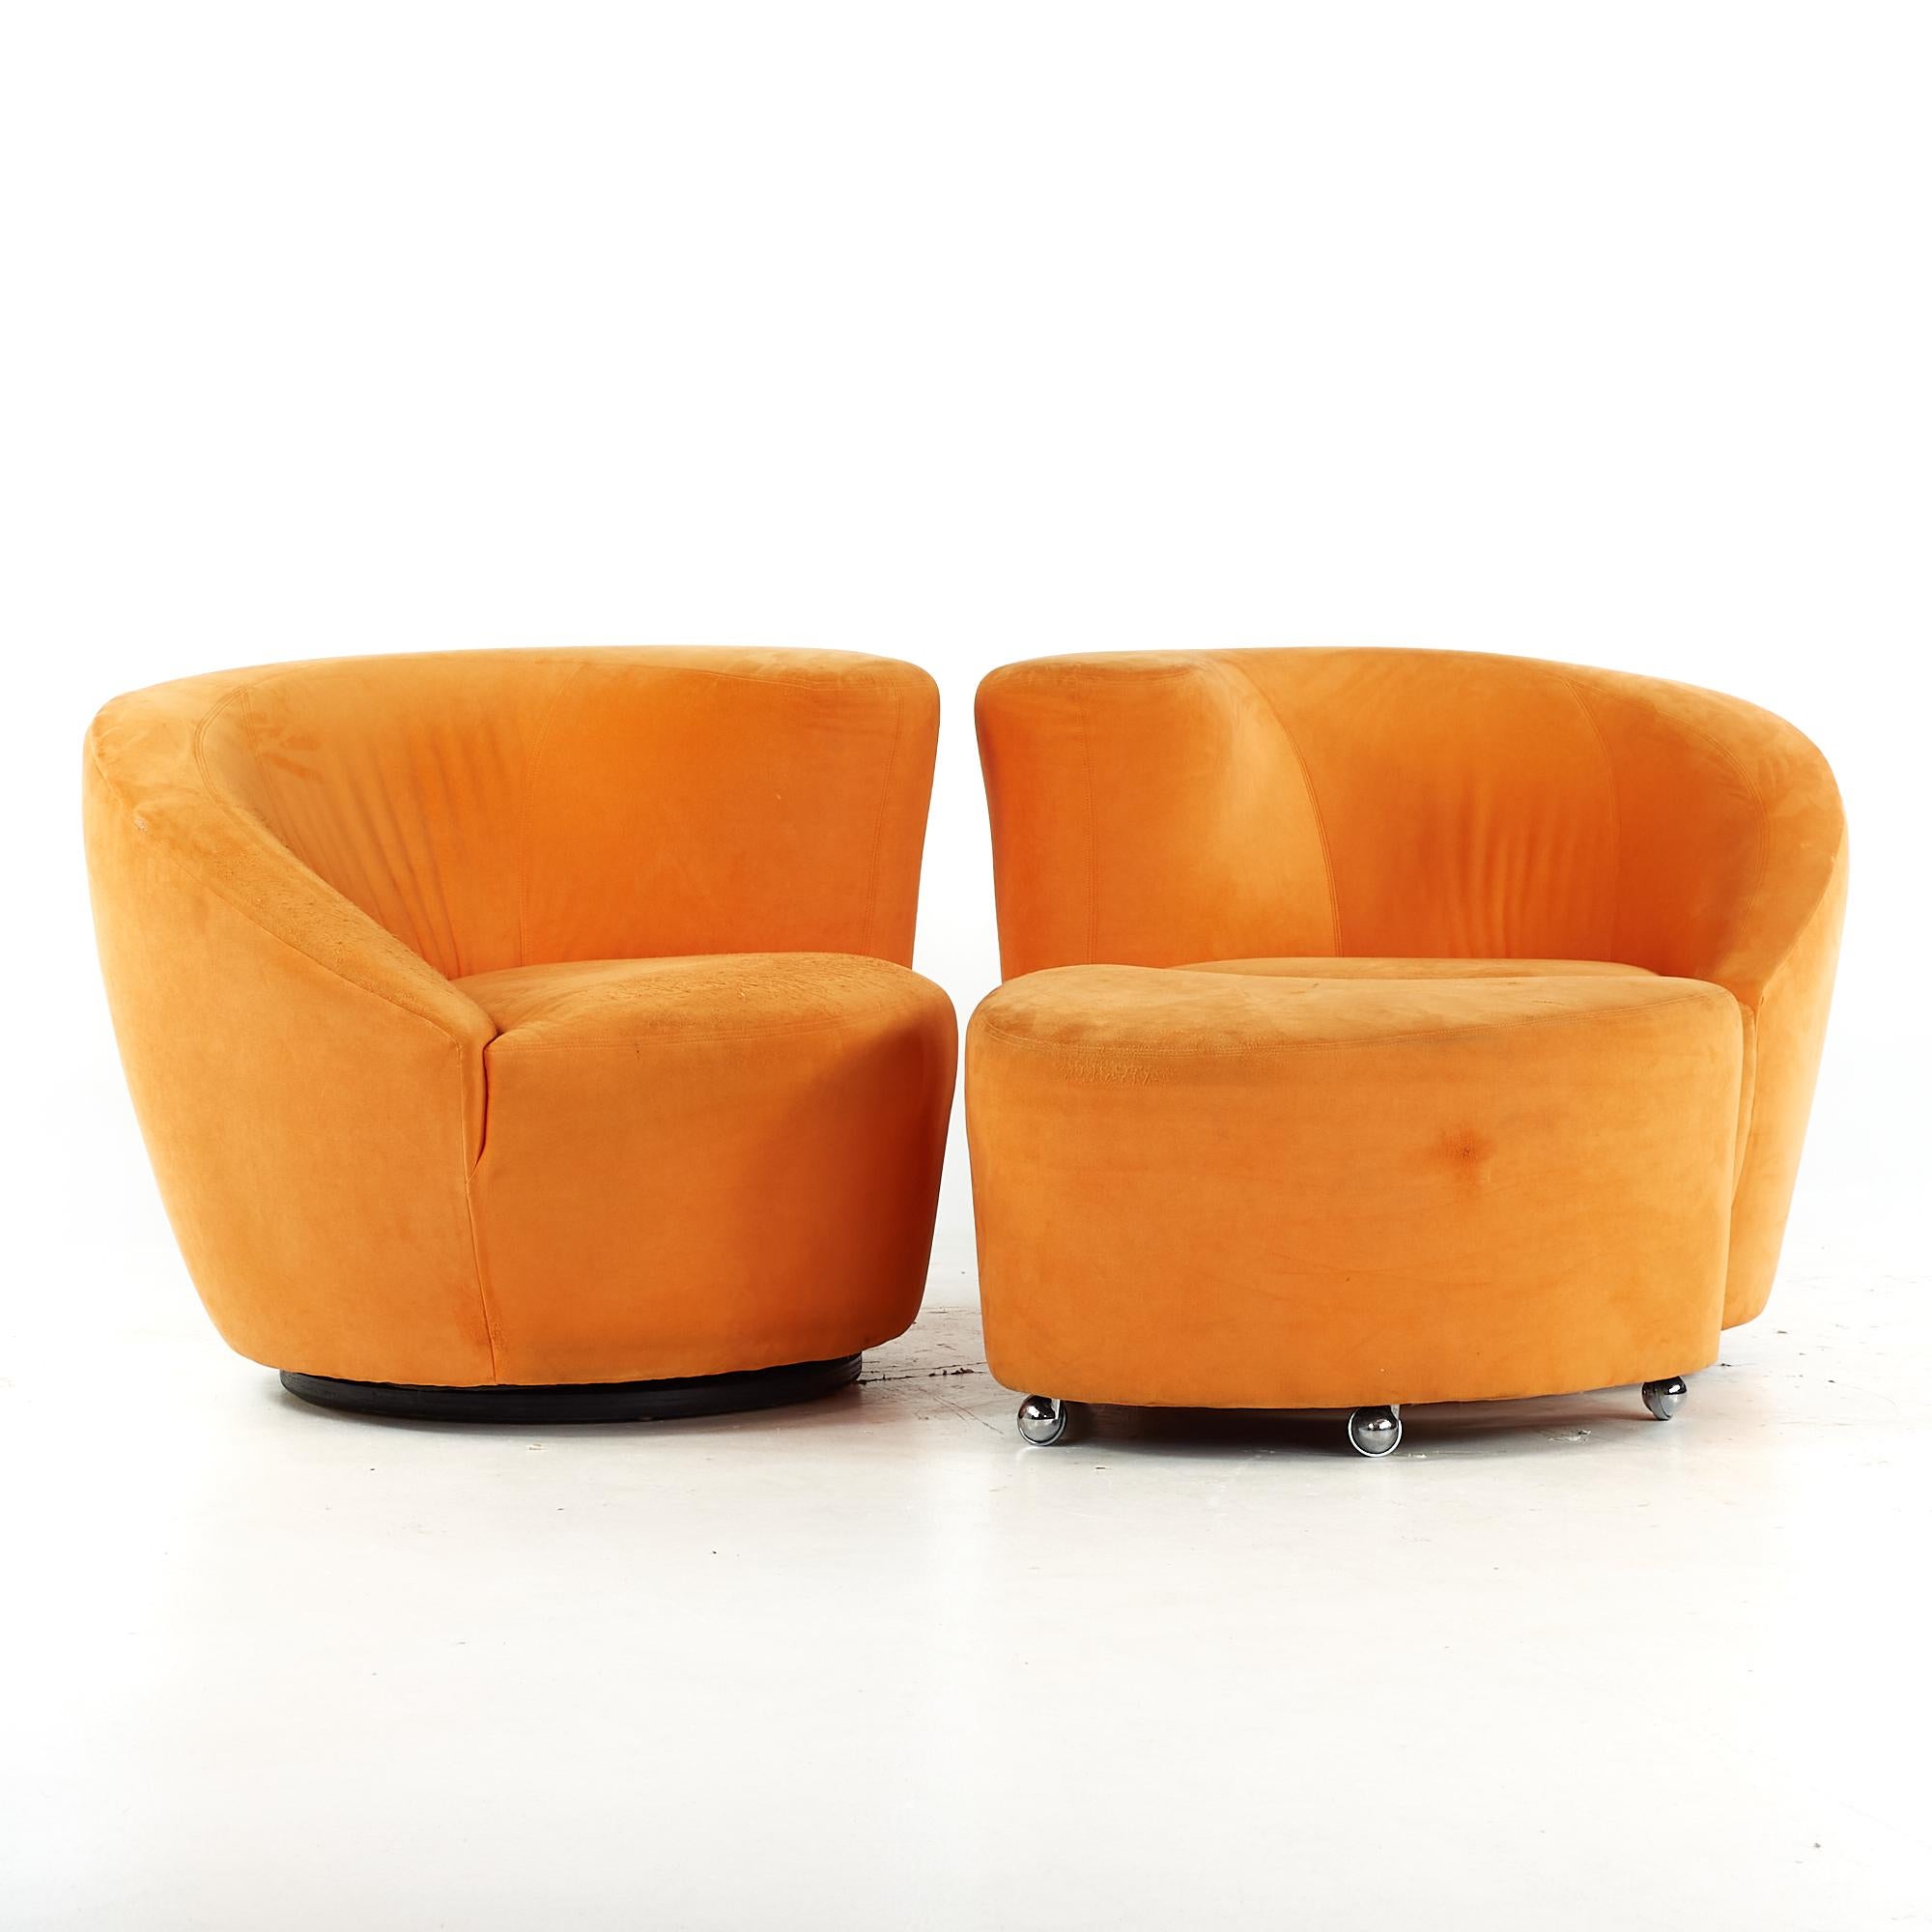 Vladimir Kagan for Directional midcentury lounge chairs with ottoman - pair

Each chair measures: 35.25 wide x 35.25 deep x 28.25 high, with a seat height of 17 inches and arm height/chair clearance of 23 inches

All pieces of furniture can be